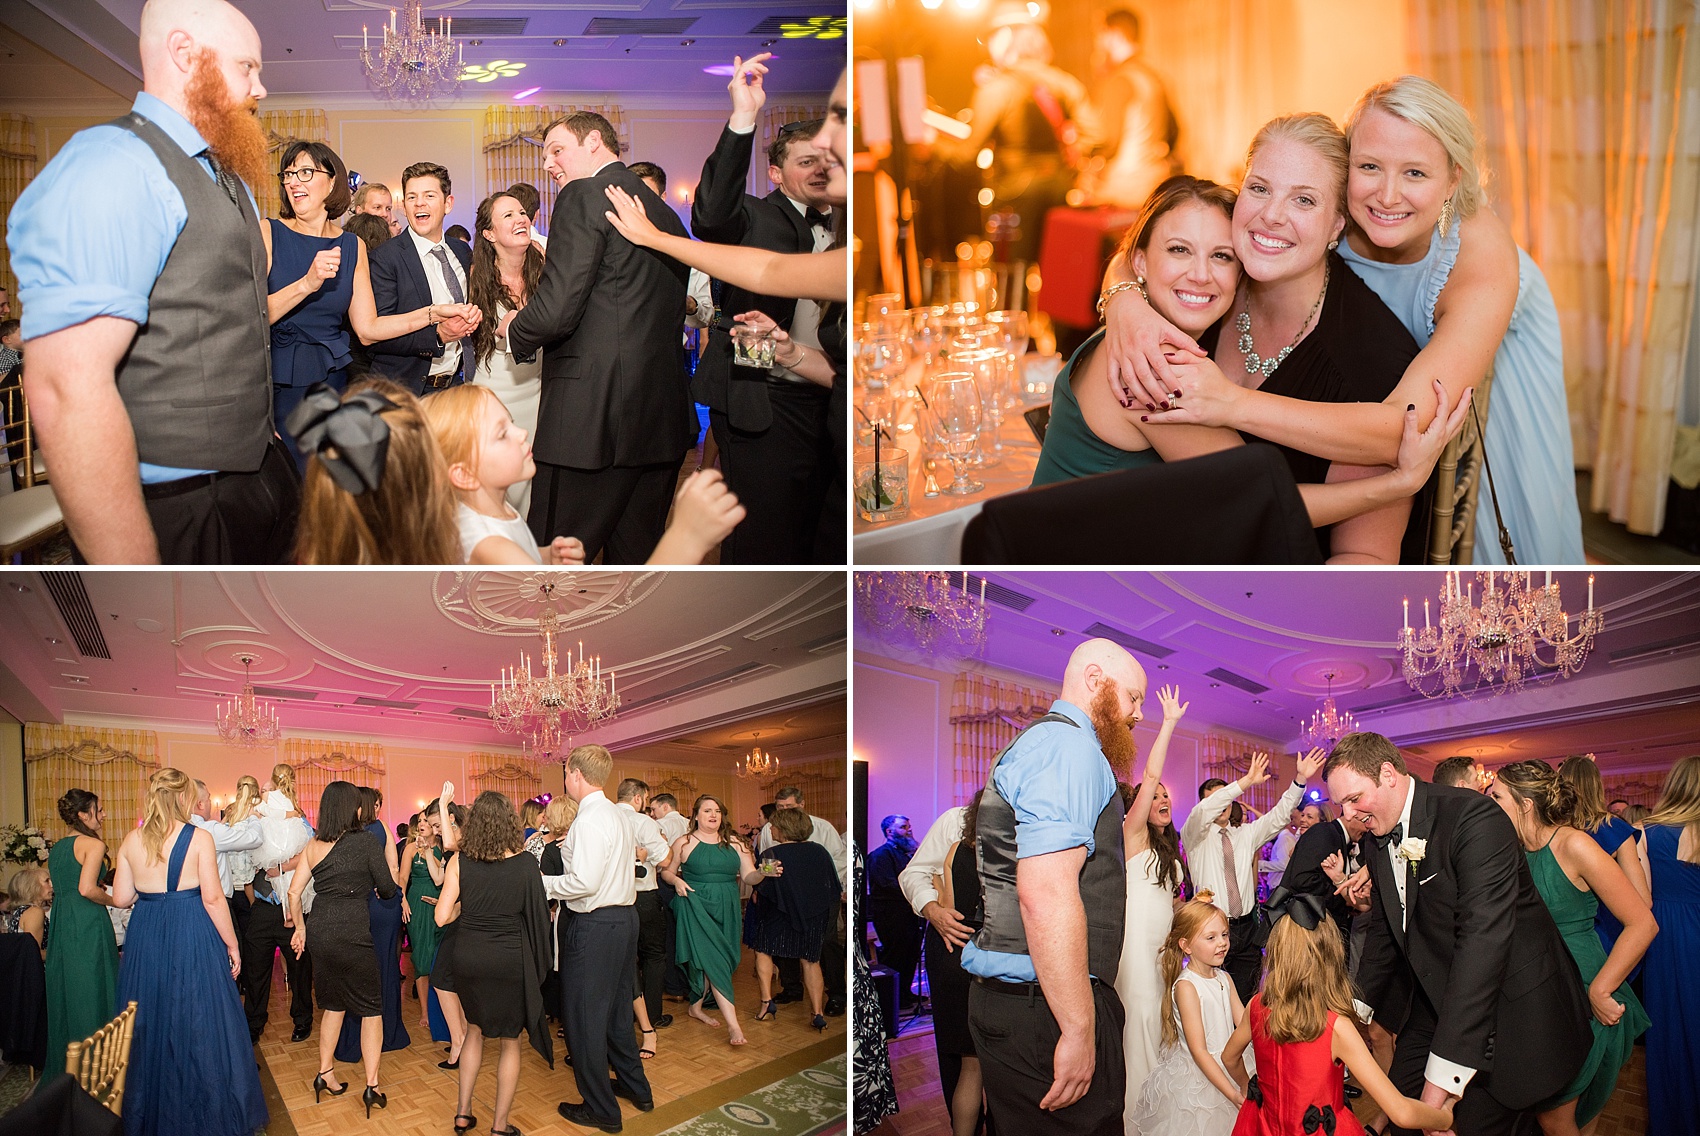 Photos of a fall wedding at The Carolina Inn, in Chapel Hill North Carolina, by Mikkel Paige Photography. This event venue doubles as a hotel for guests, with a for an indoor reception space. The bride and groom danced their first dance, listened to toasts and speeches and cut their cake in a beautiful ballroom. Click through to see all of this wedding inspiration! Planning by @asouthernsoiree #thecarolinainn #ChapelHillWeddings #MikkelPaige #indoorreception #ballroom